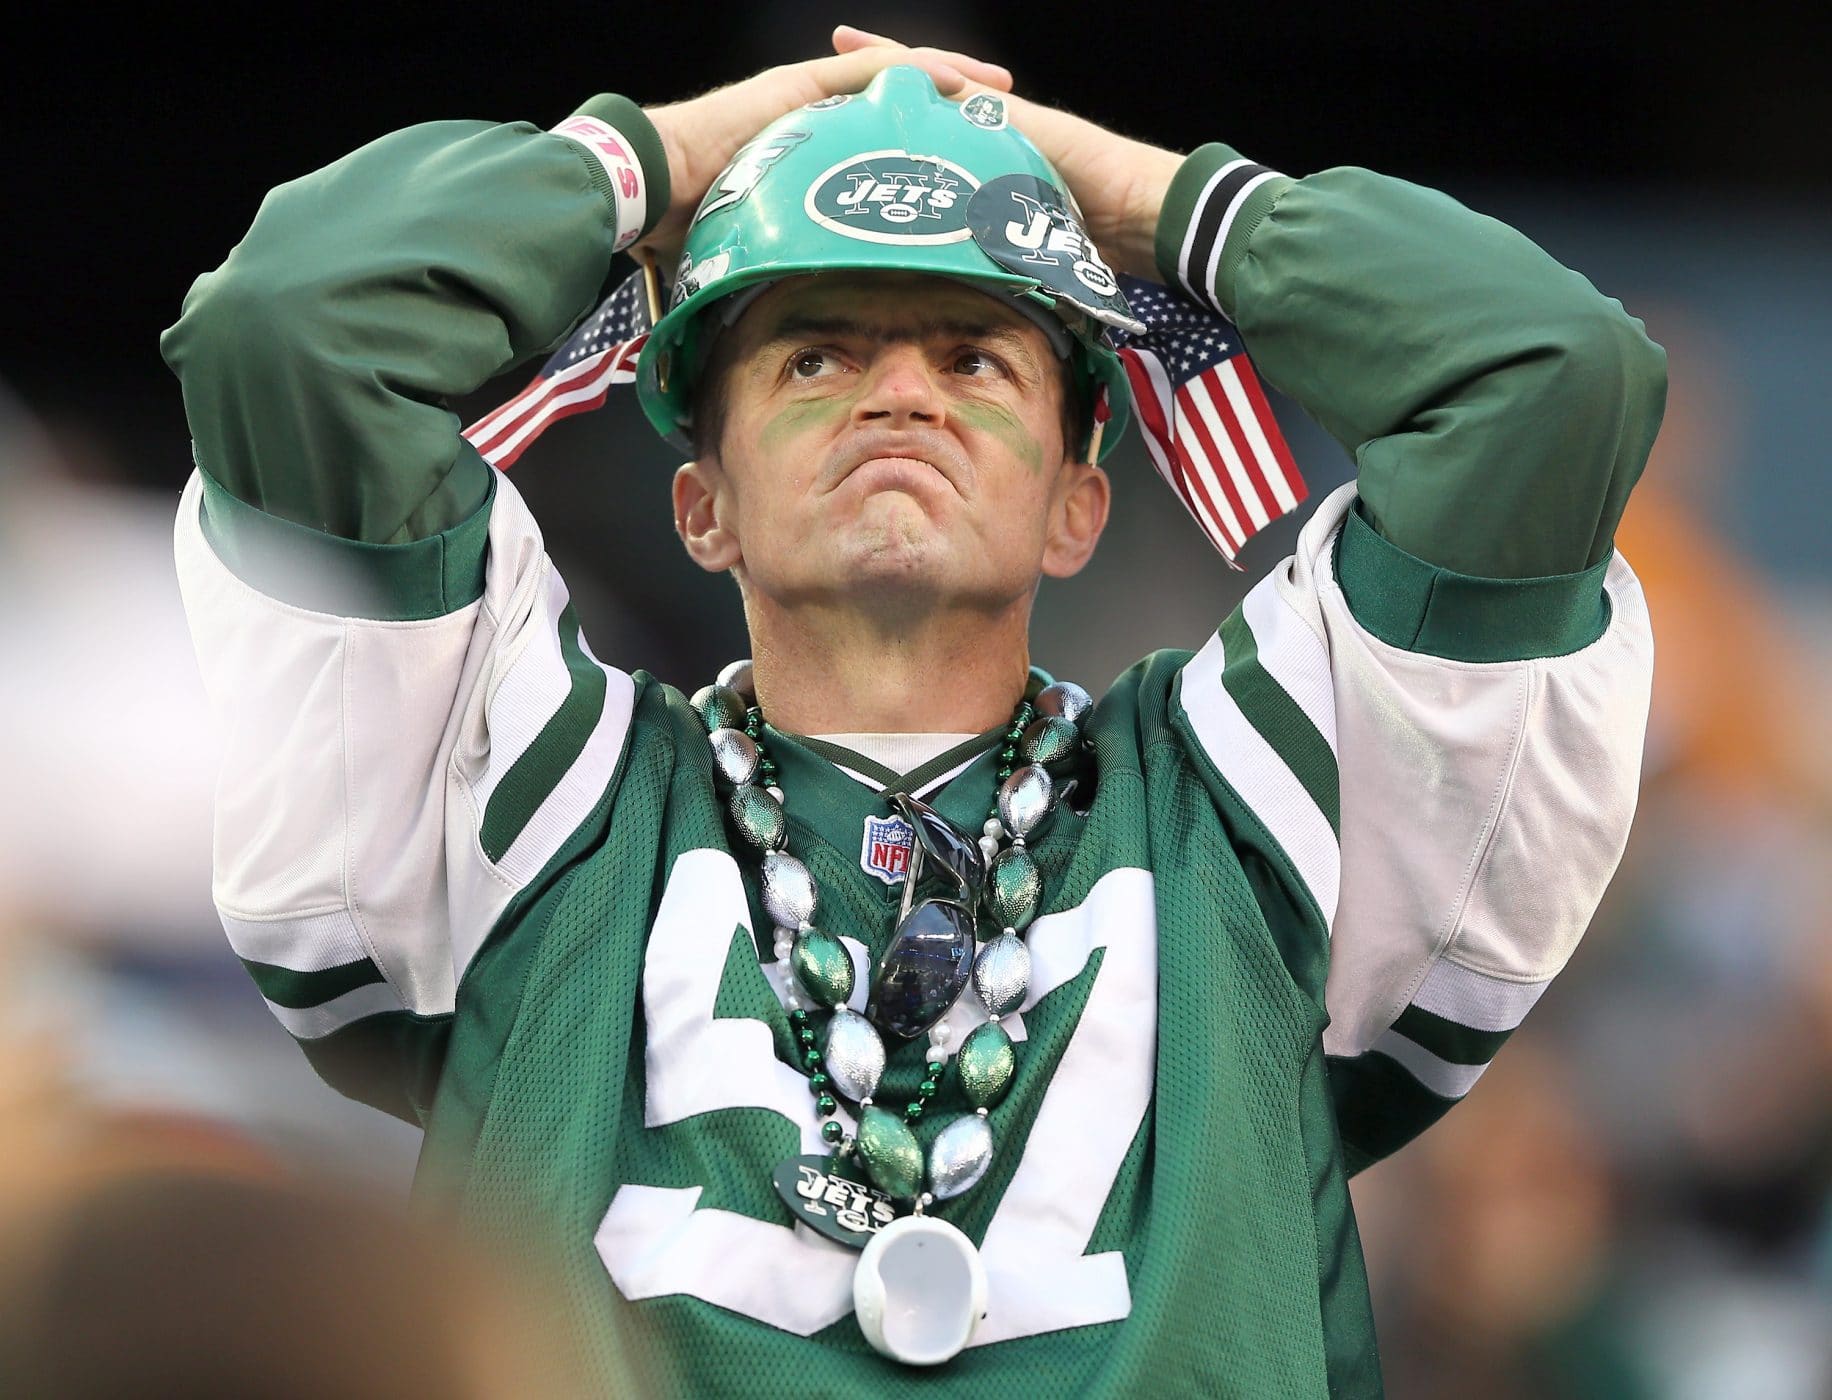 New York Jets: What are fans left to think after Sunday's embarrassment?